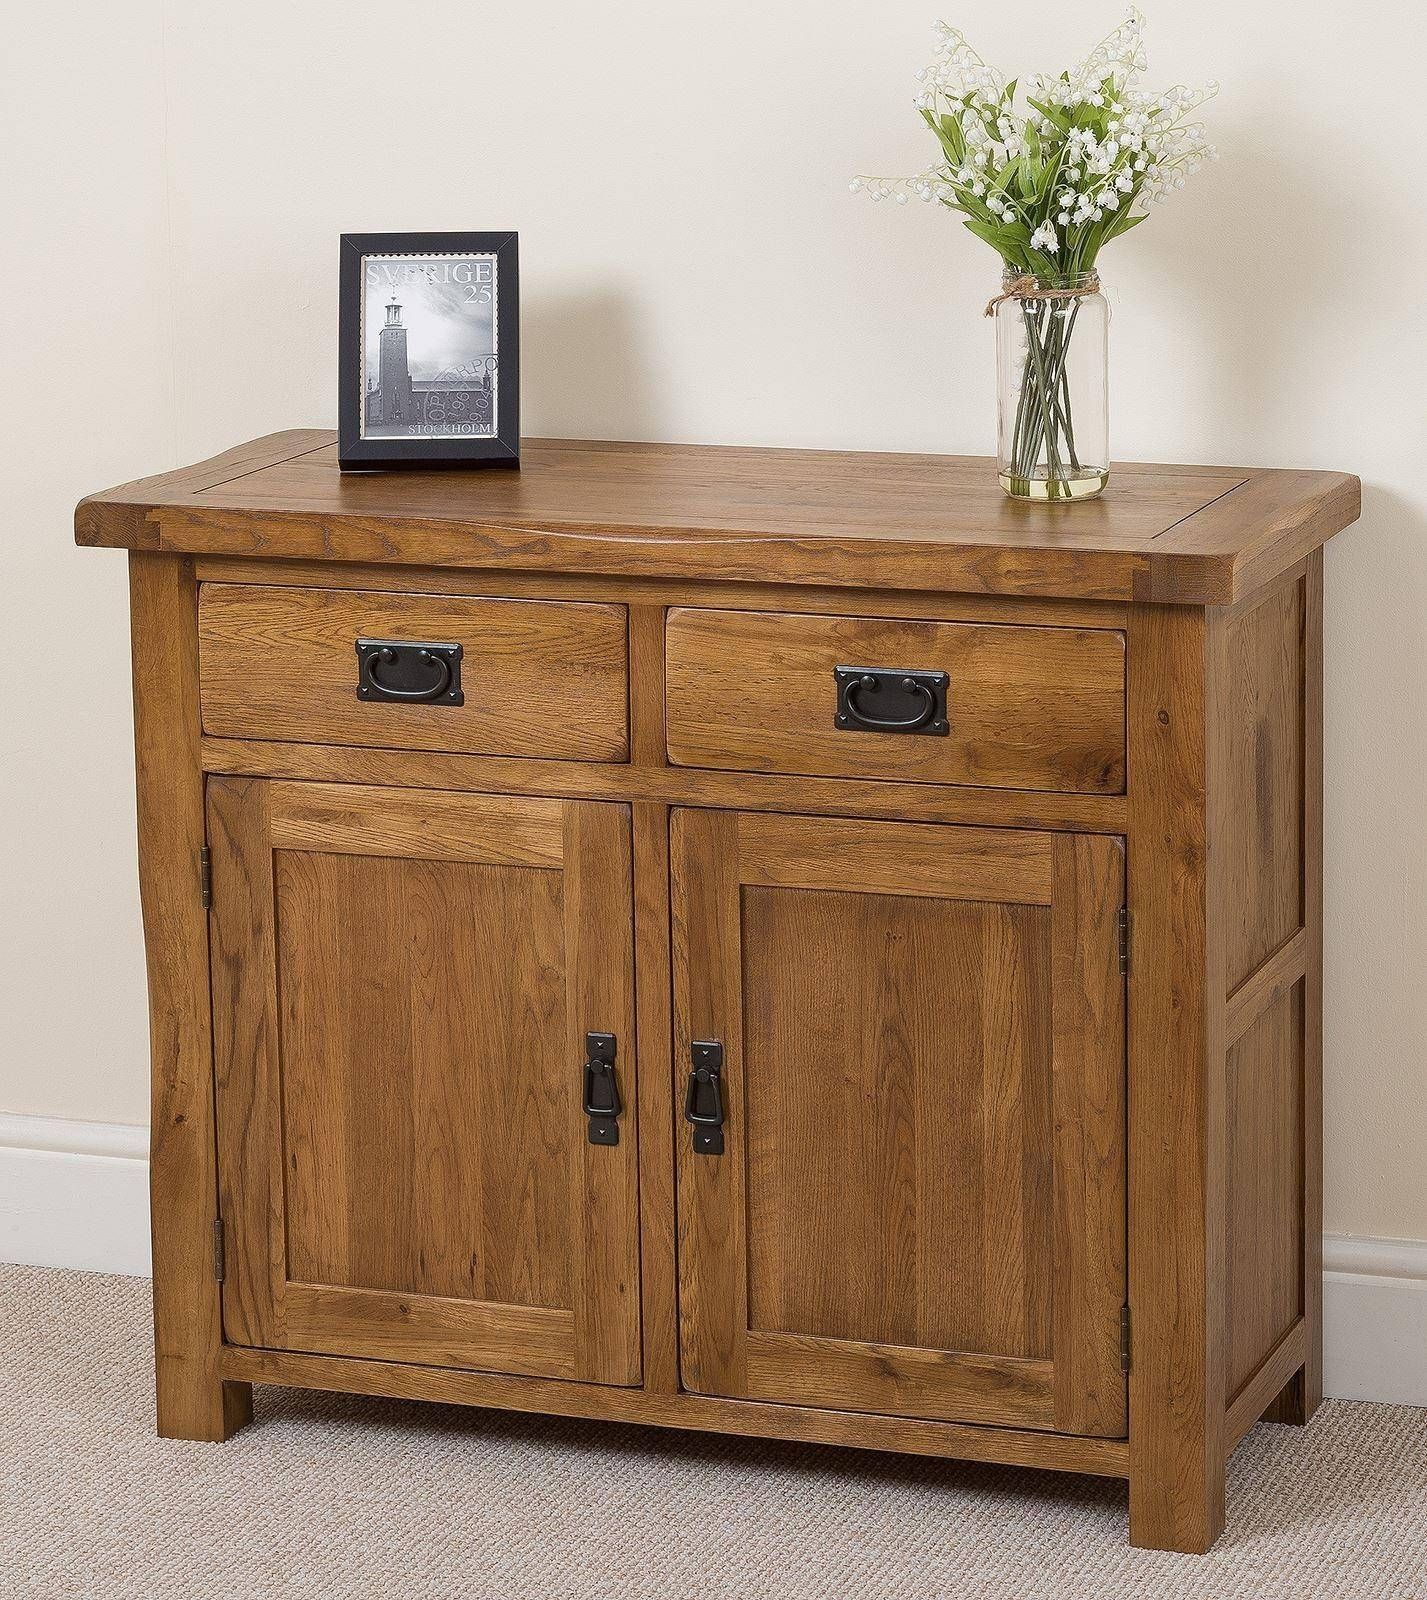 Cotswold Rustic Small Oak Sideboard | Free Uk Delivery In Latest Oak Furniture Sideboards (View 4 of 15)